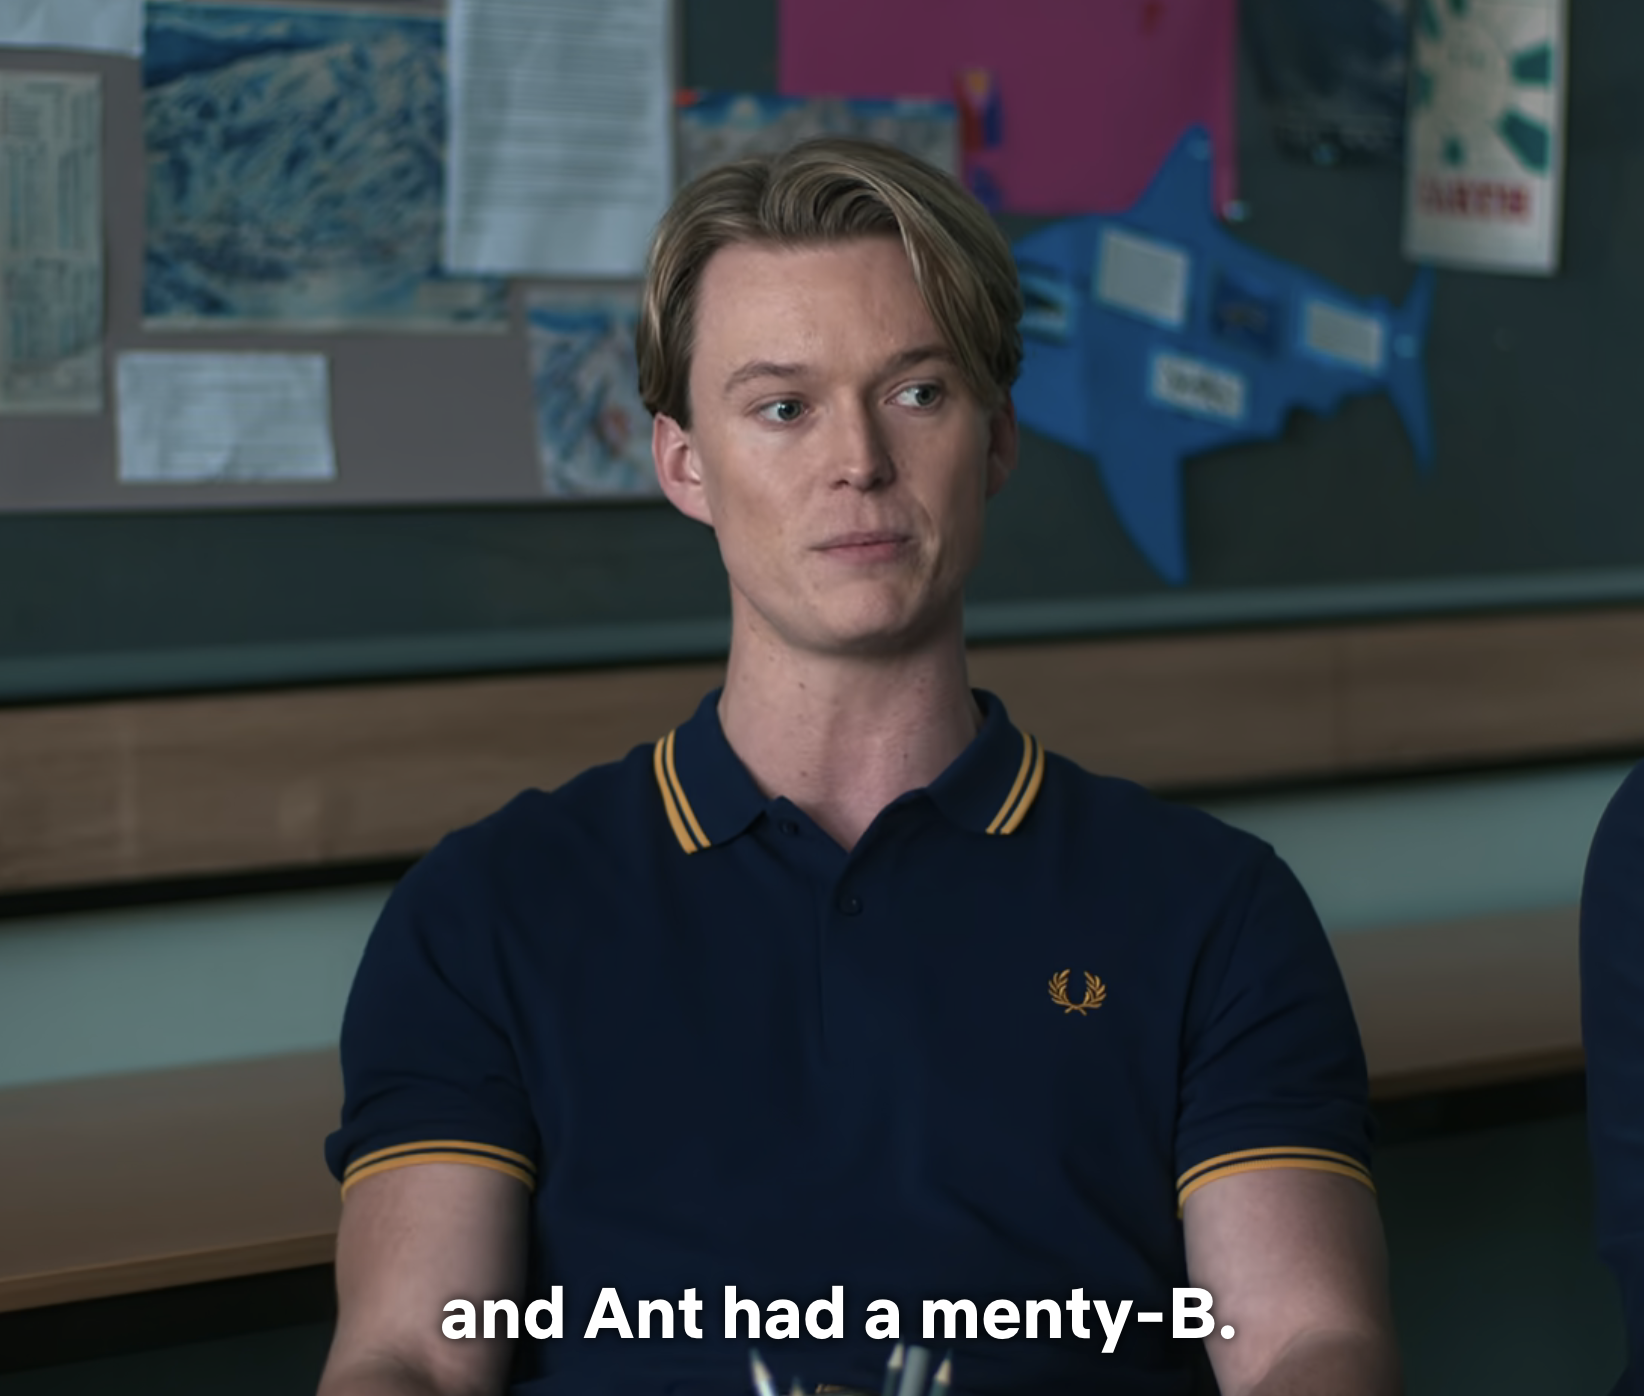 A person is wearing a polo shirt, sitting in a classroom, with a caption reading a slang phrase